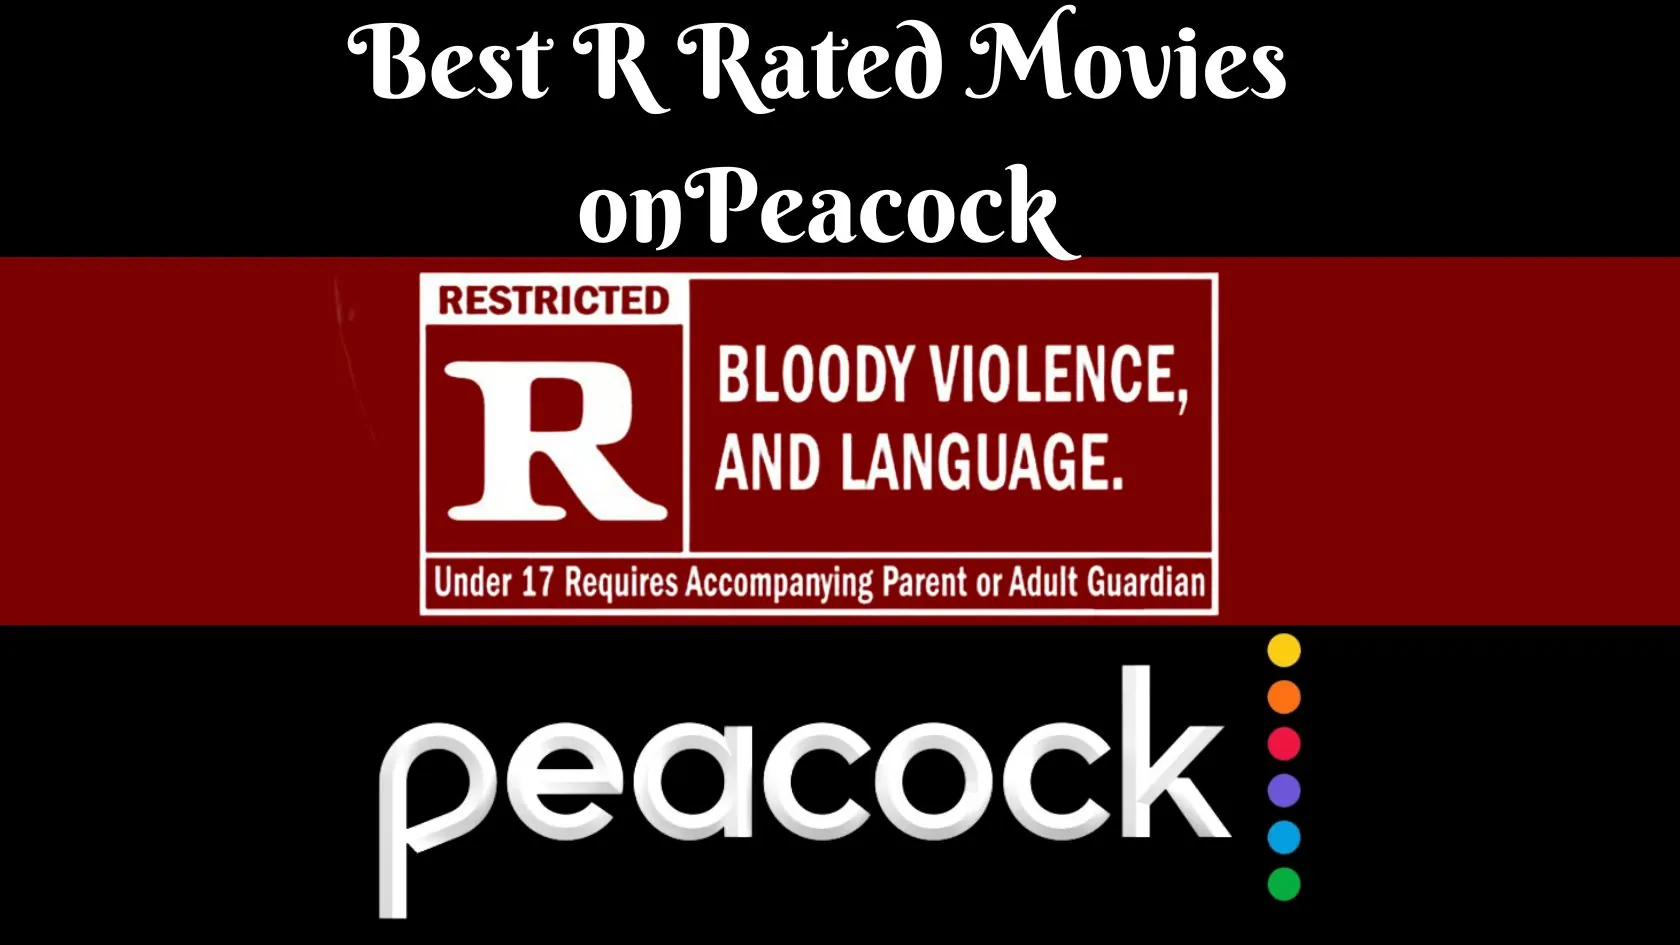 Best R Rated Movies on Peacock